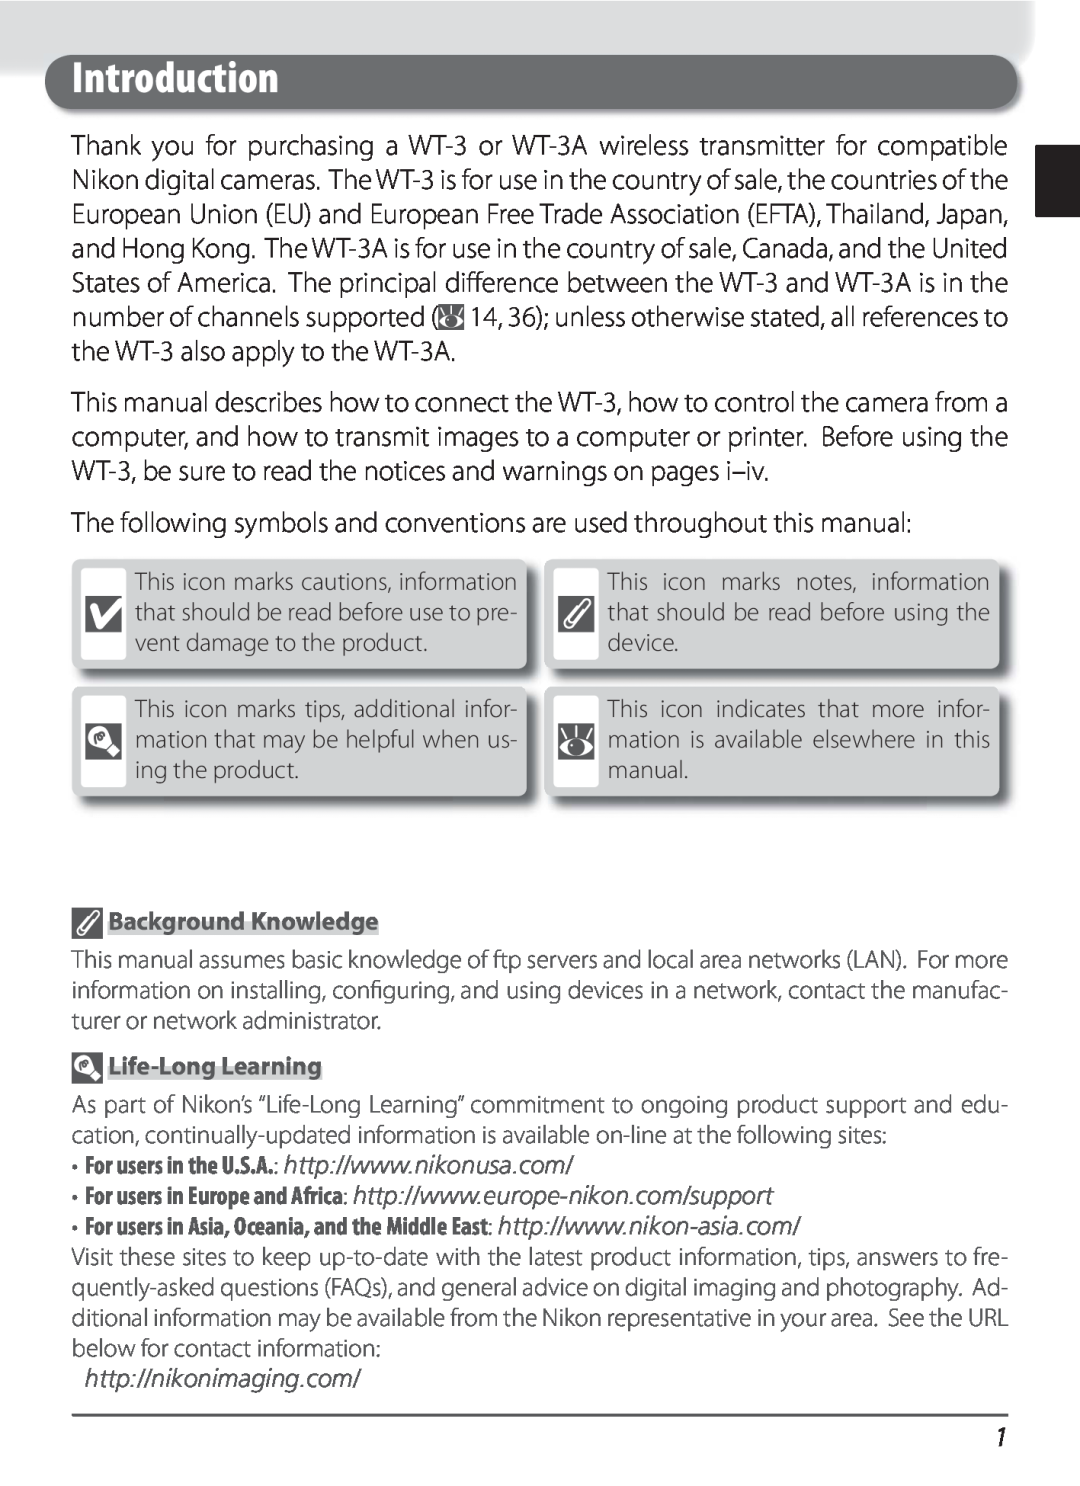 Nikon WT-3 Introduction, The following symbols and conventions are used throughout this manual, Background Knowledge 